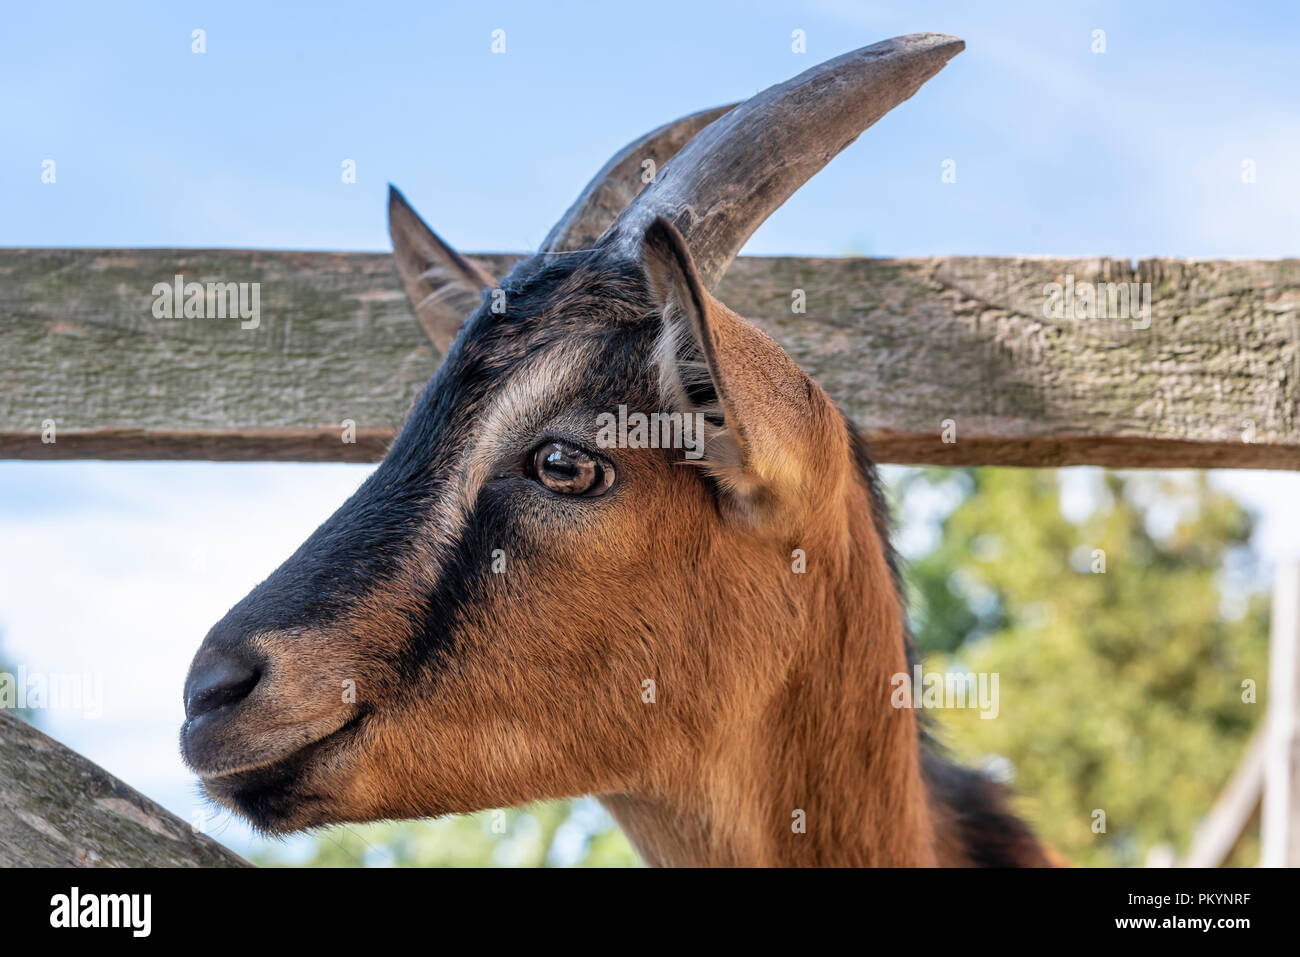 Orange young goat with black stripes and horns, expressive eyes, portrait, profile picture, with its head between the wooden planks of a fence. Stock Photo